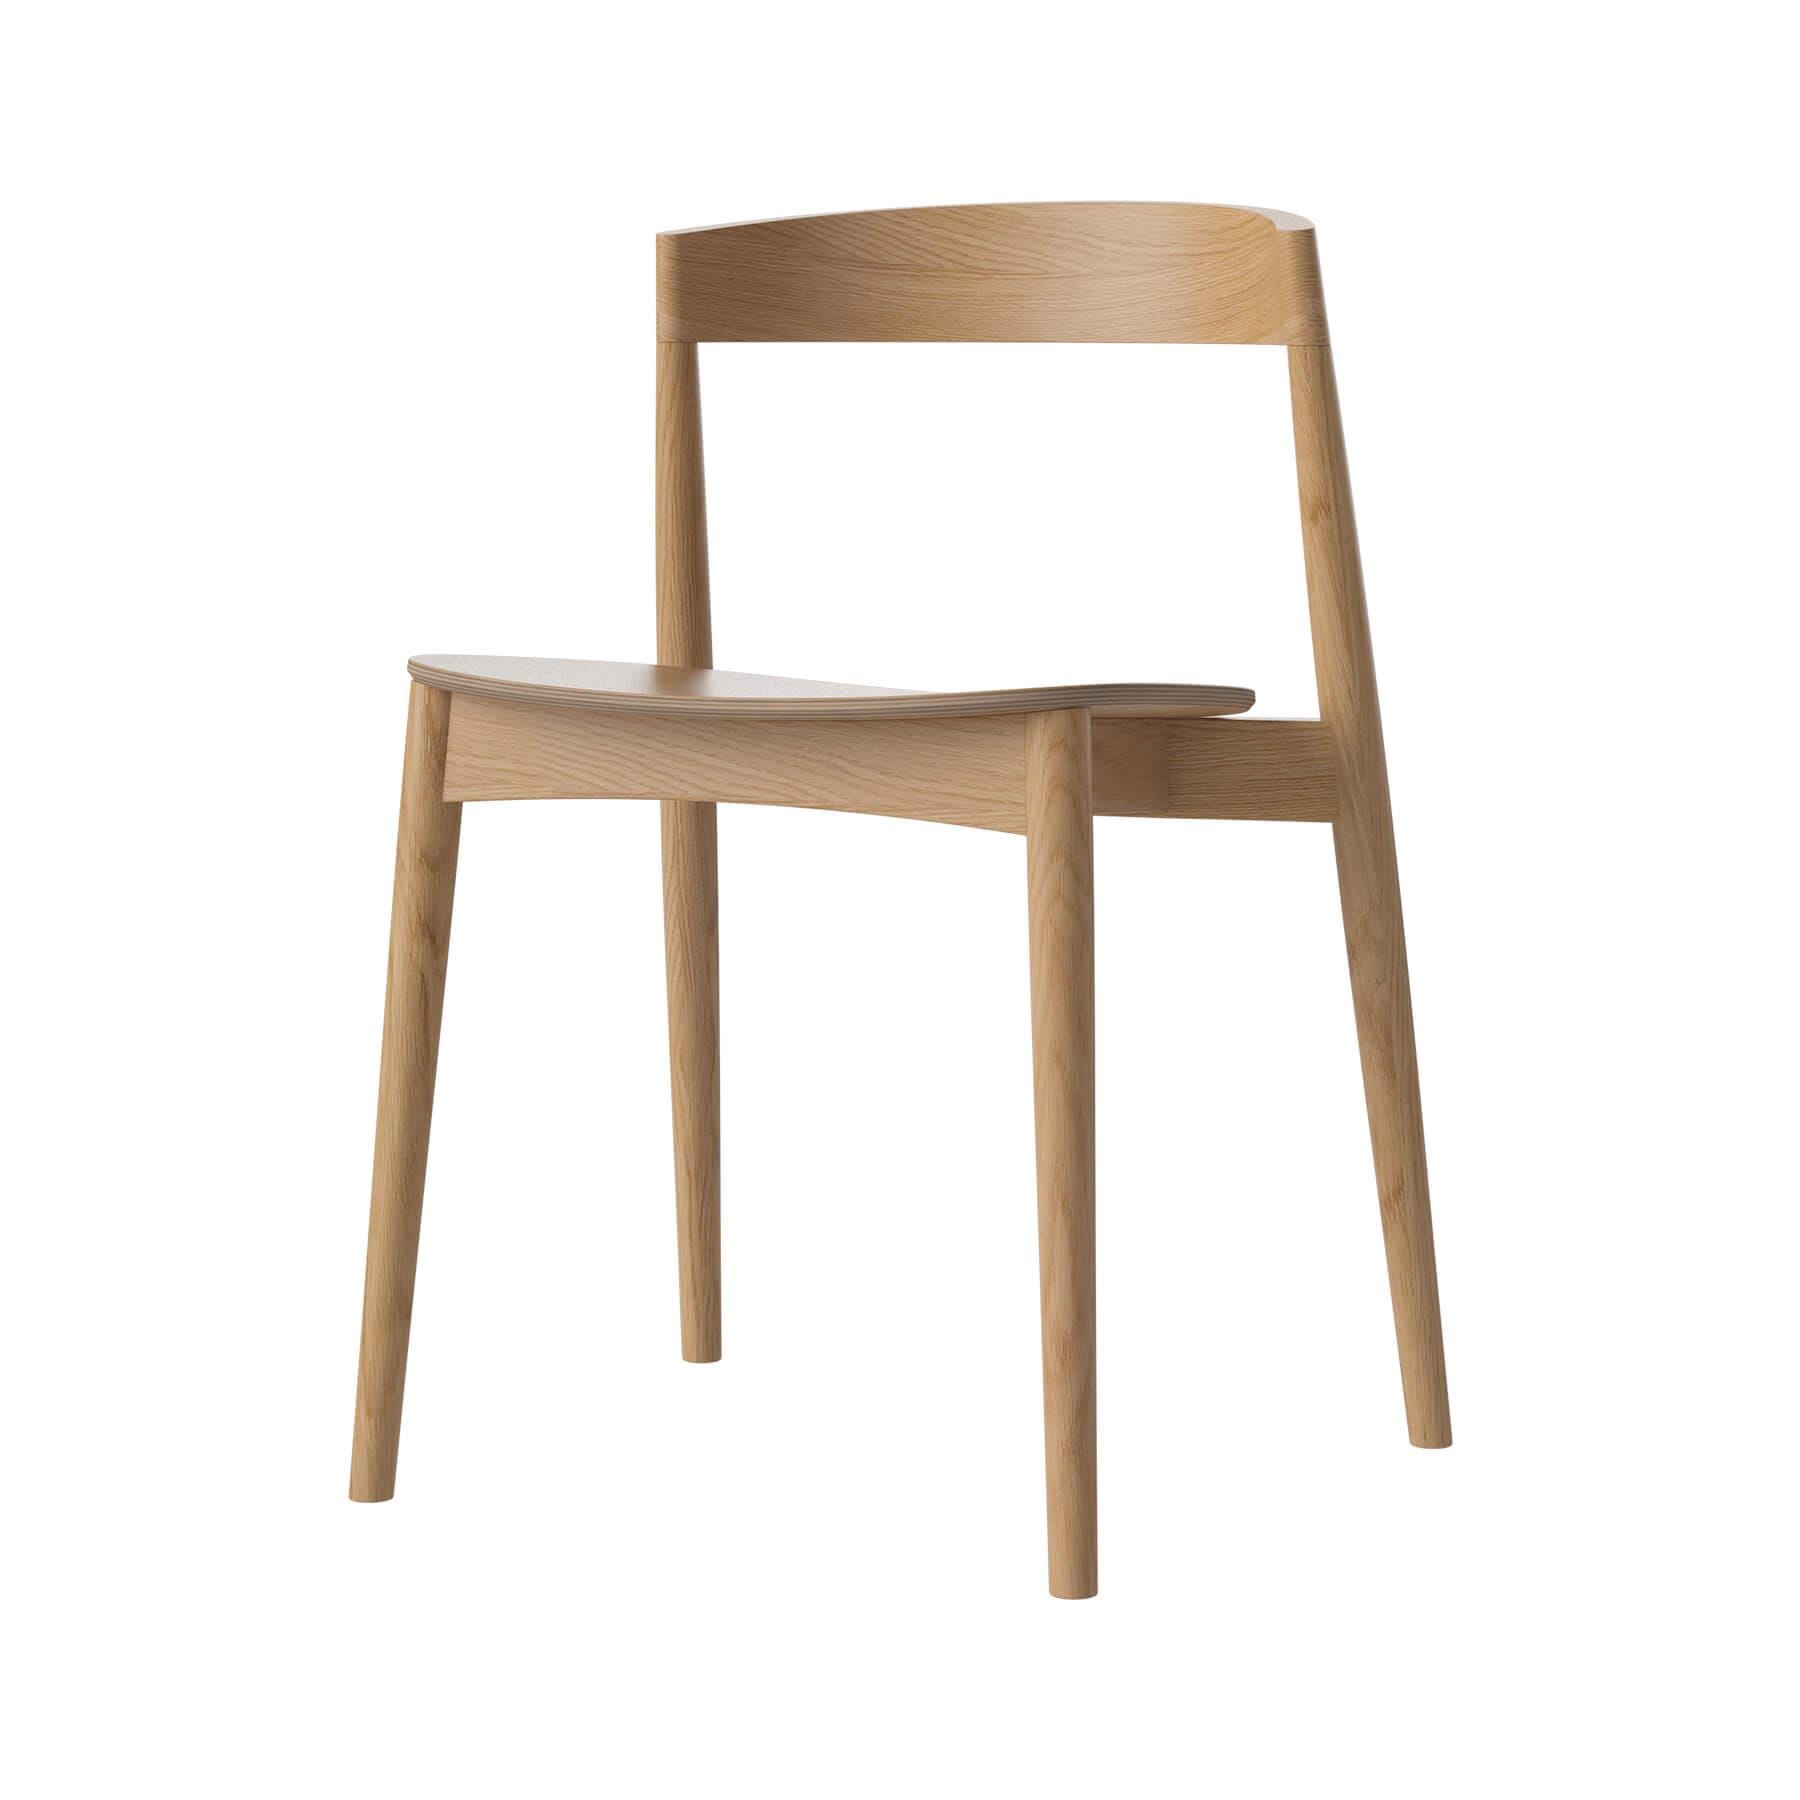 Bolia Kite Dining Chair Oiled Oak Light Wood Designer Furniture From Holloways Of Ludlow